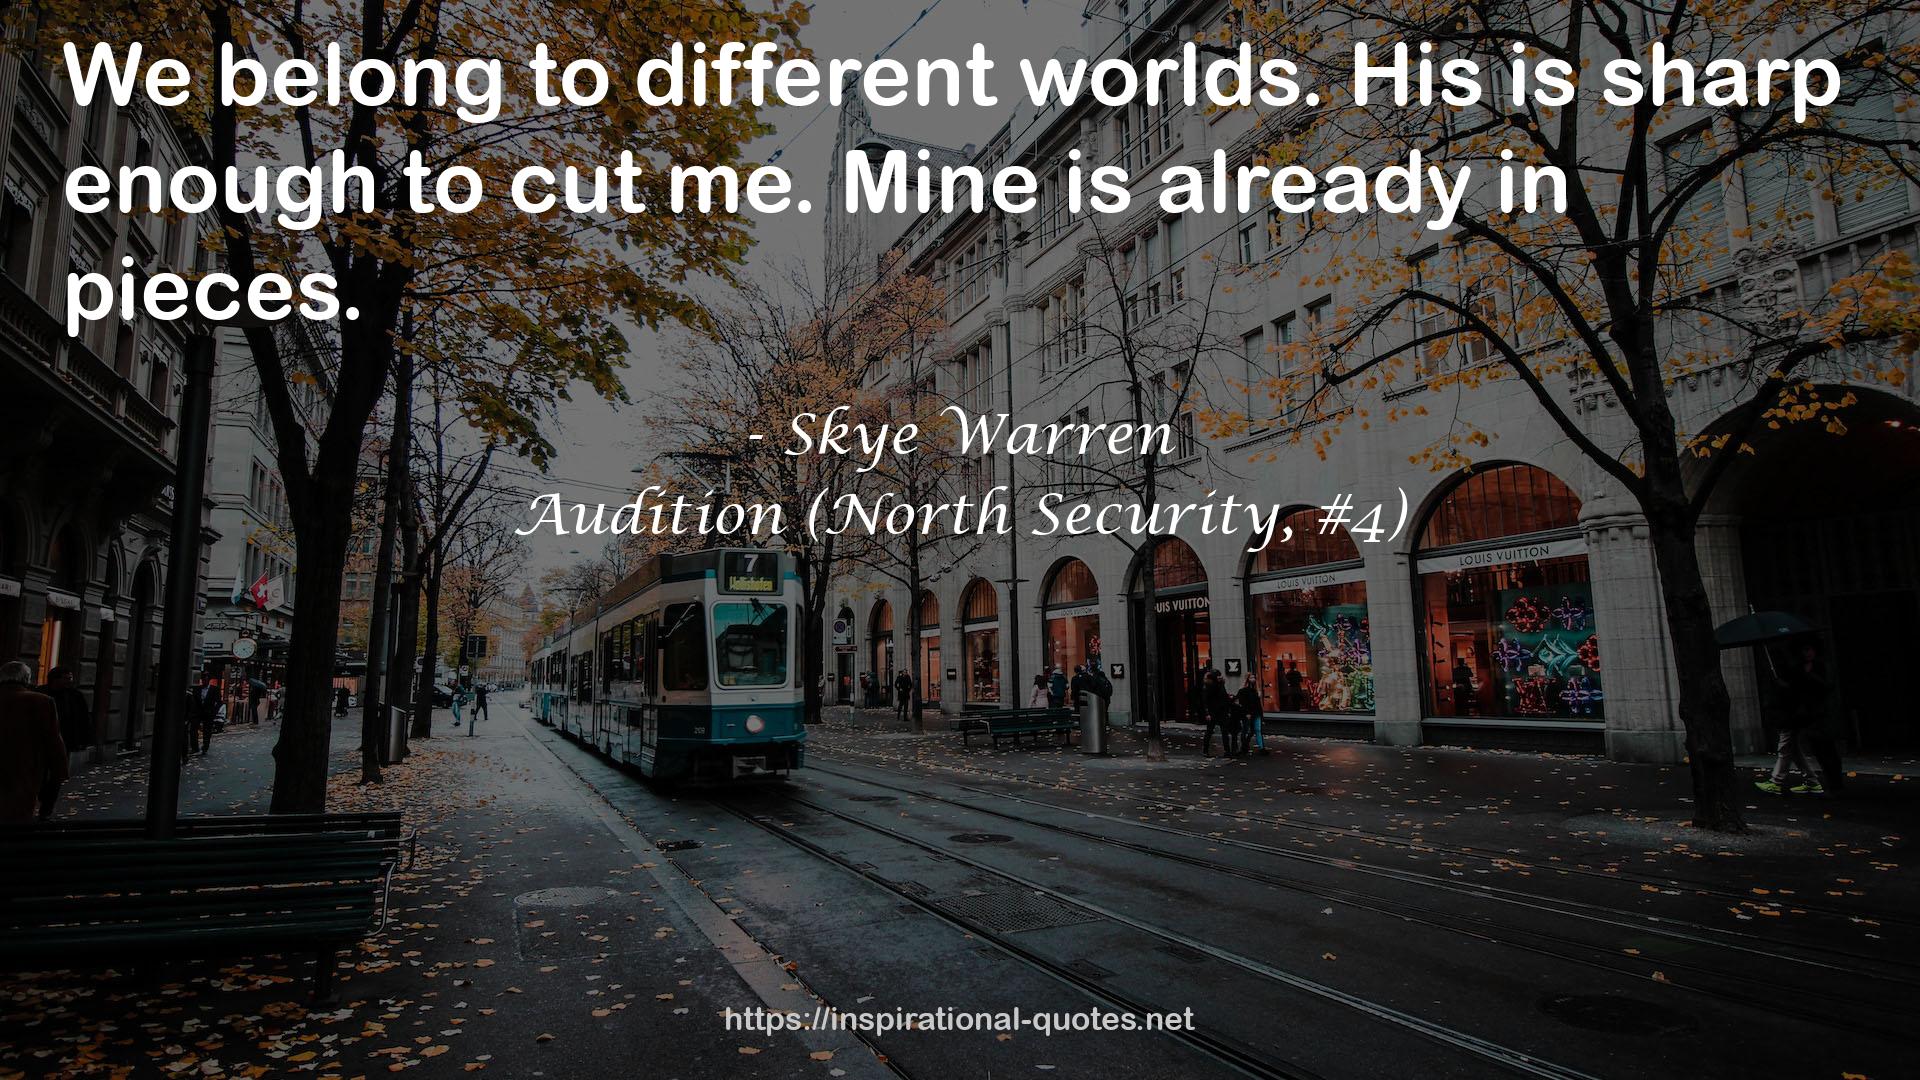 Audition (North Security, #4) QUOTES